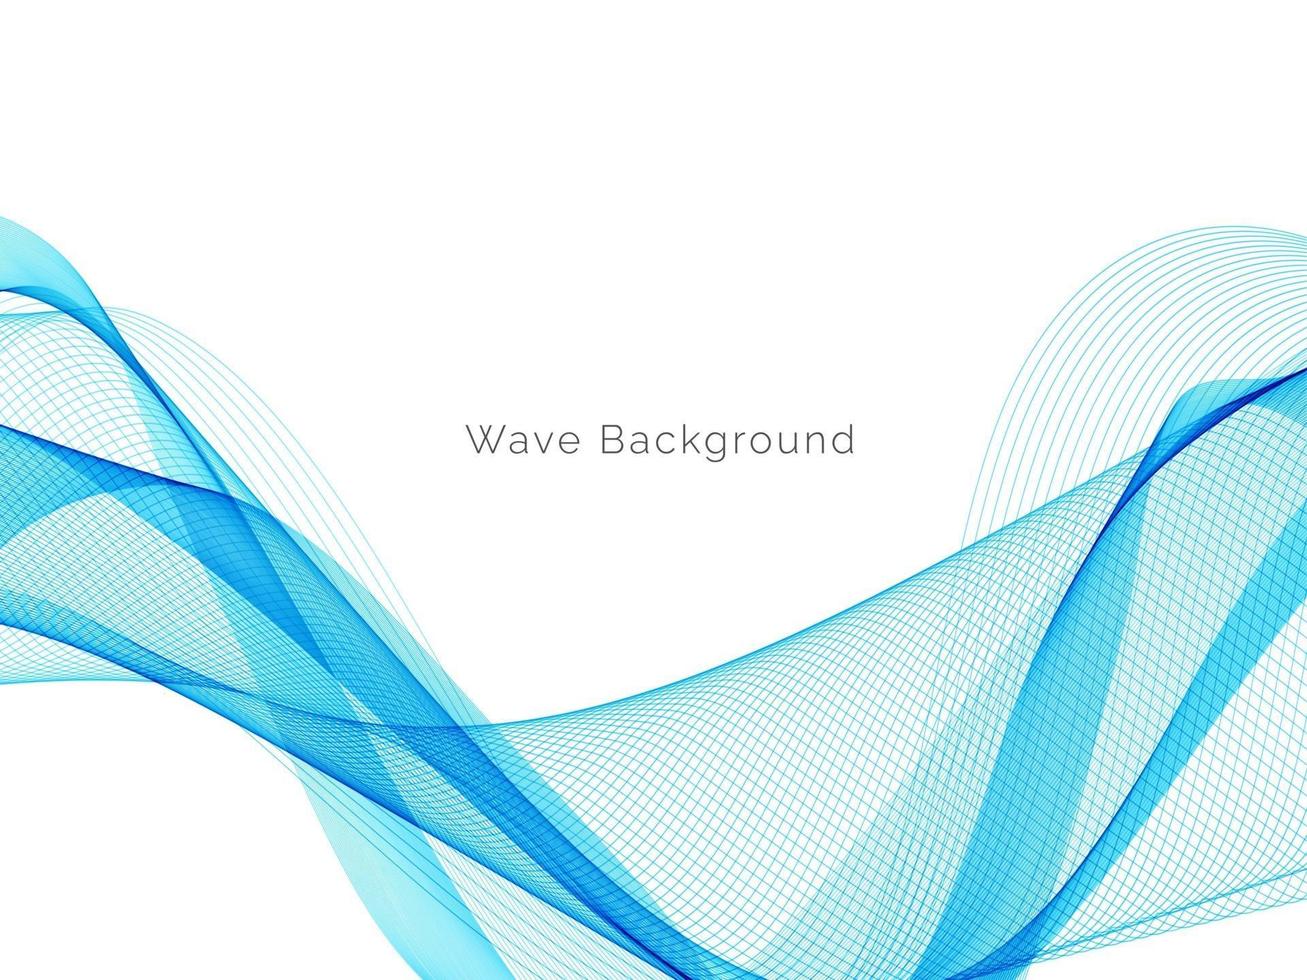 Abstract smooth stylish blue wave background vector